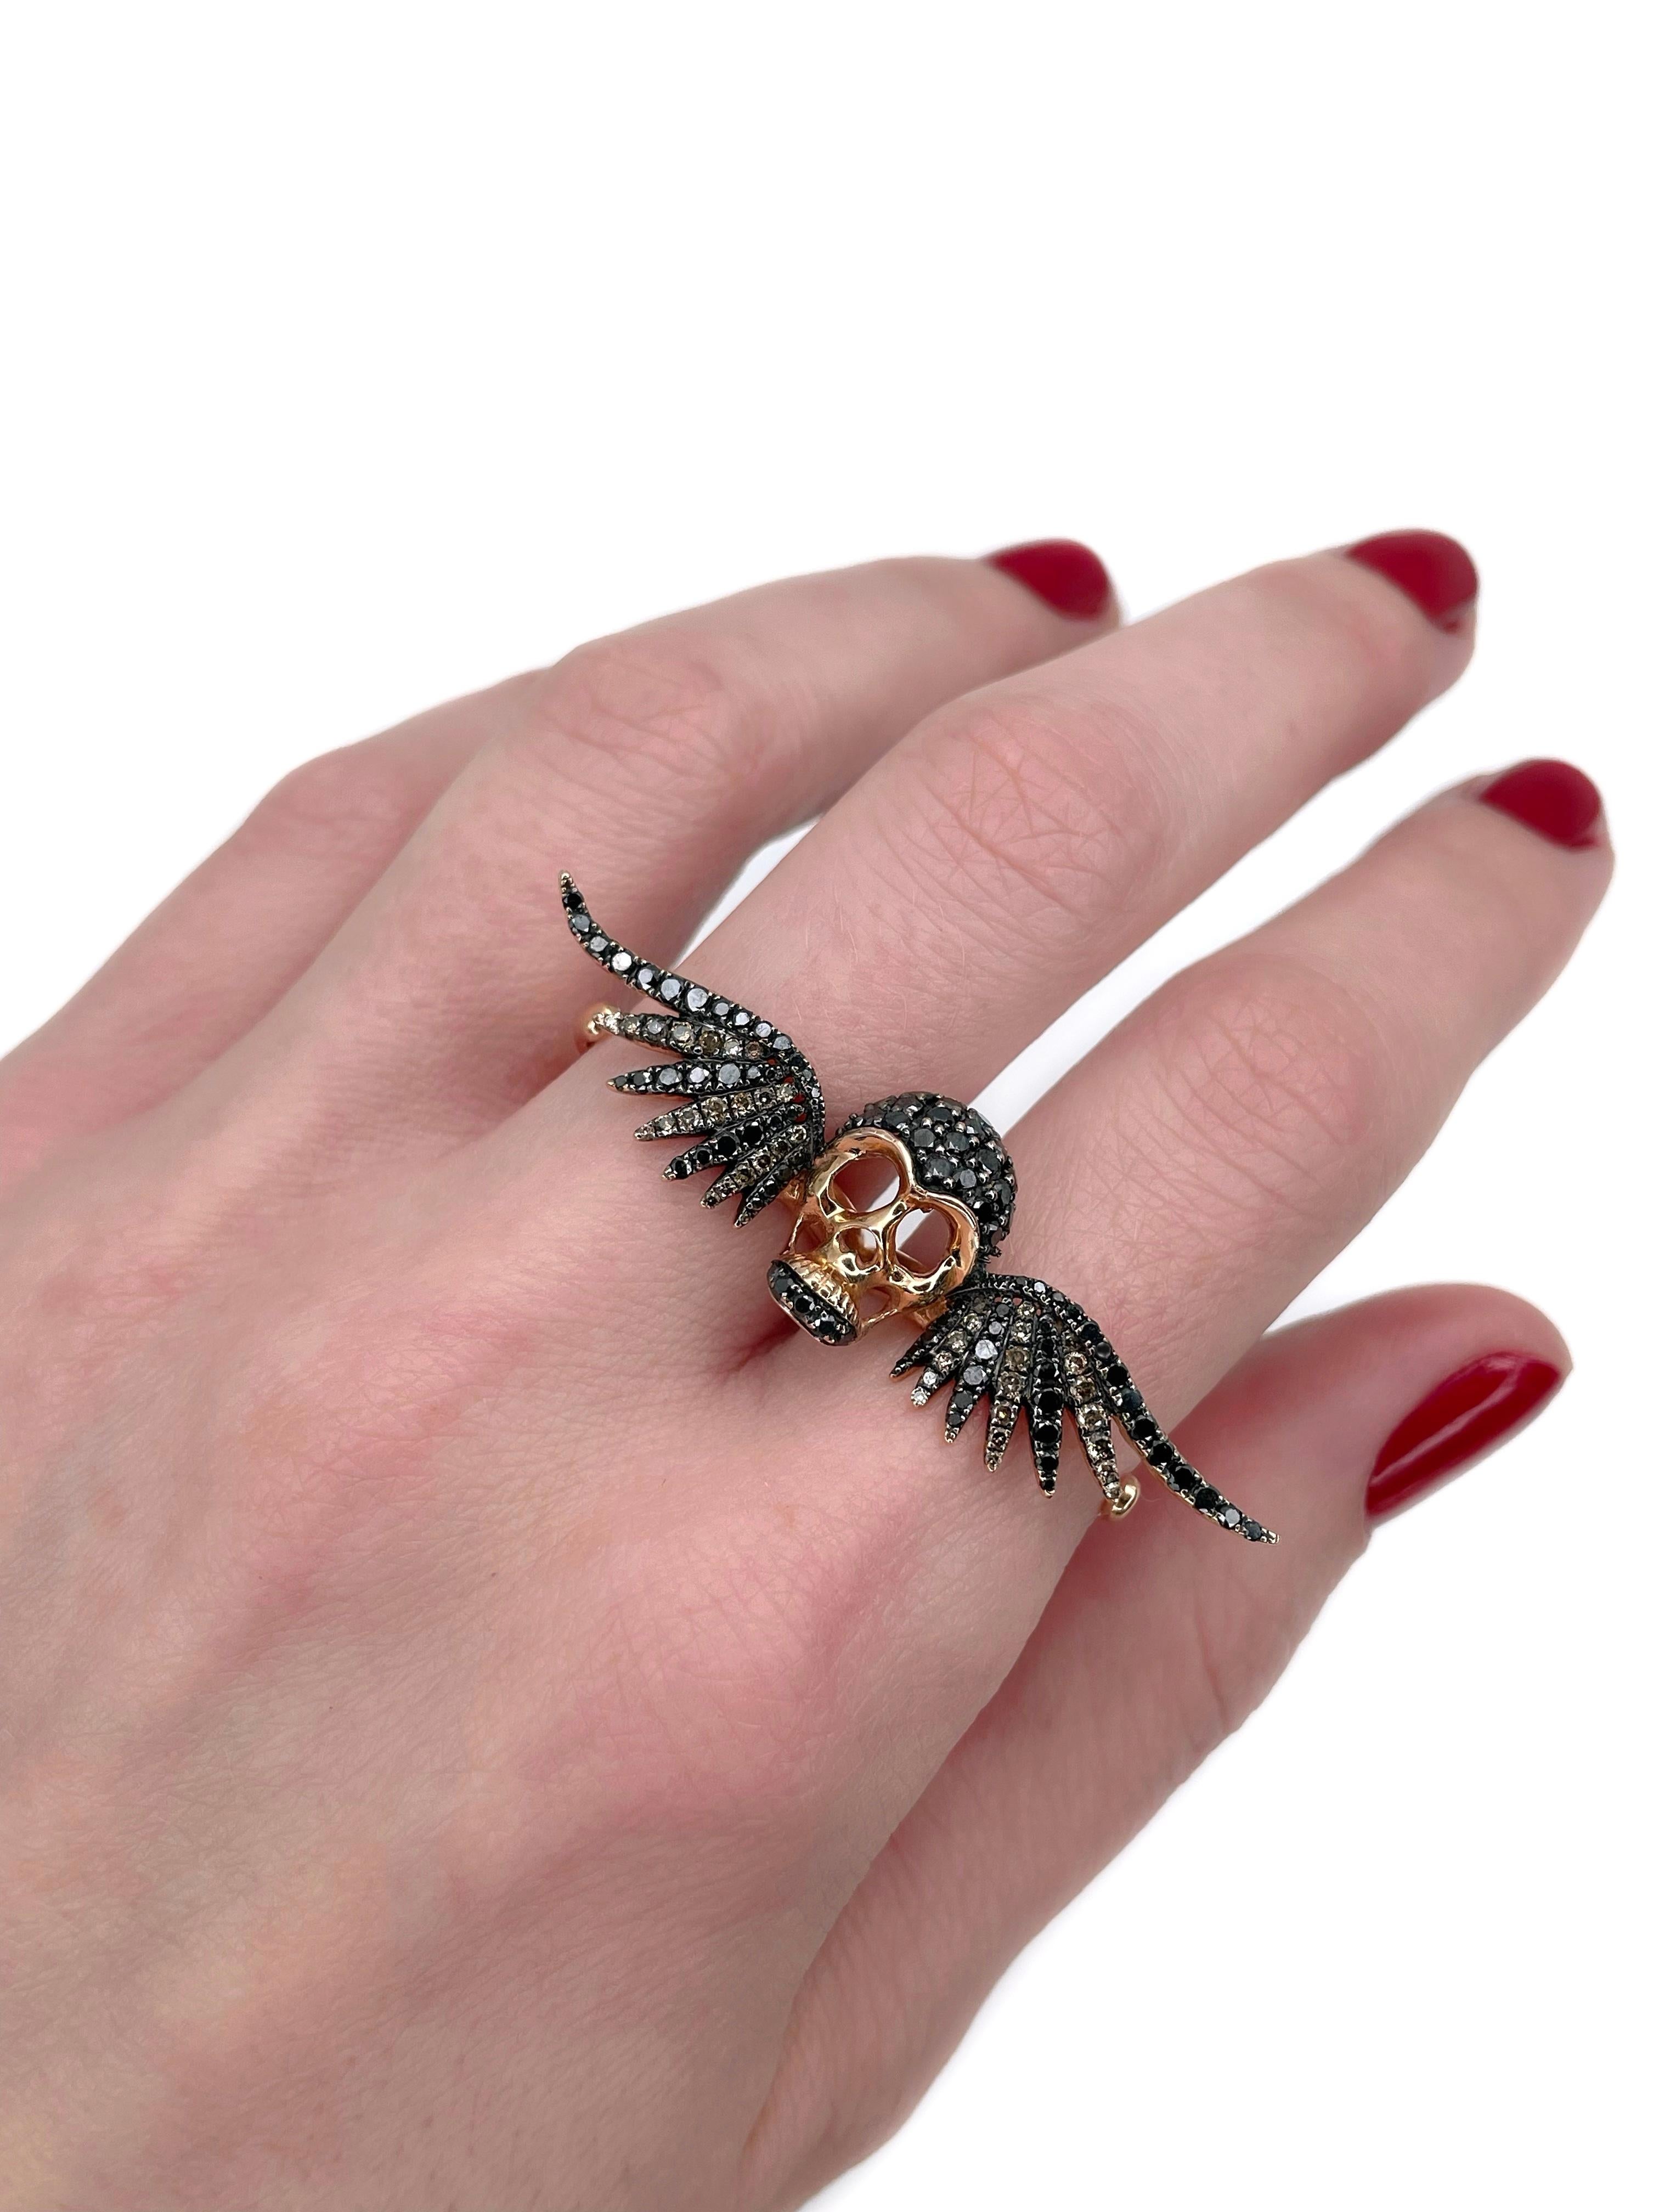 This is a modern design two finger cocktail ring crafted in 18K gold. Circa 2000. 

The piece depicts a skull with the wings. 

The ring features:
- 89 black diamonds (round brilliant cut, TW 1.10ct, Declasse) 
- 39 brown diamonds (round brilliant